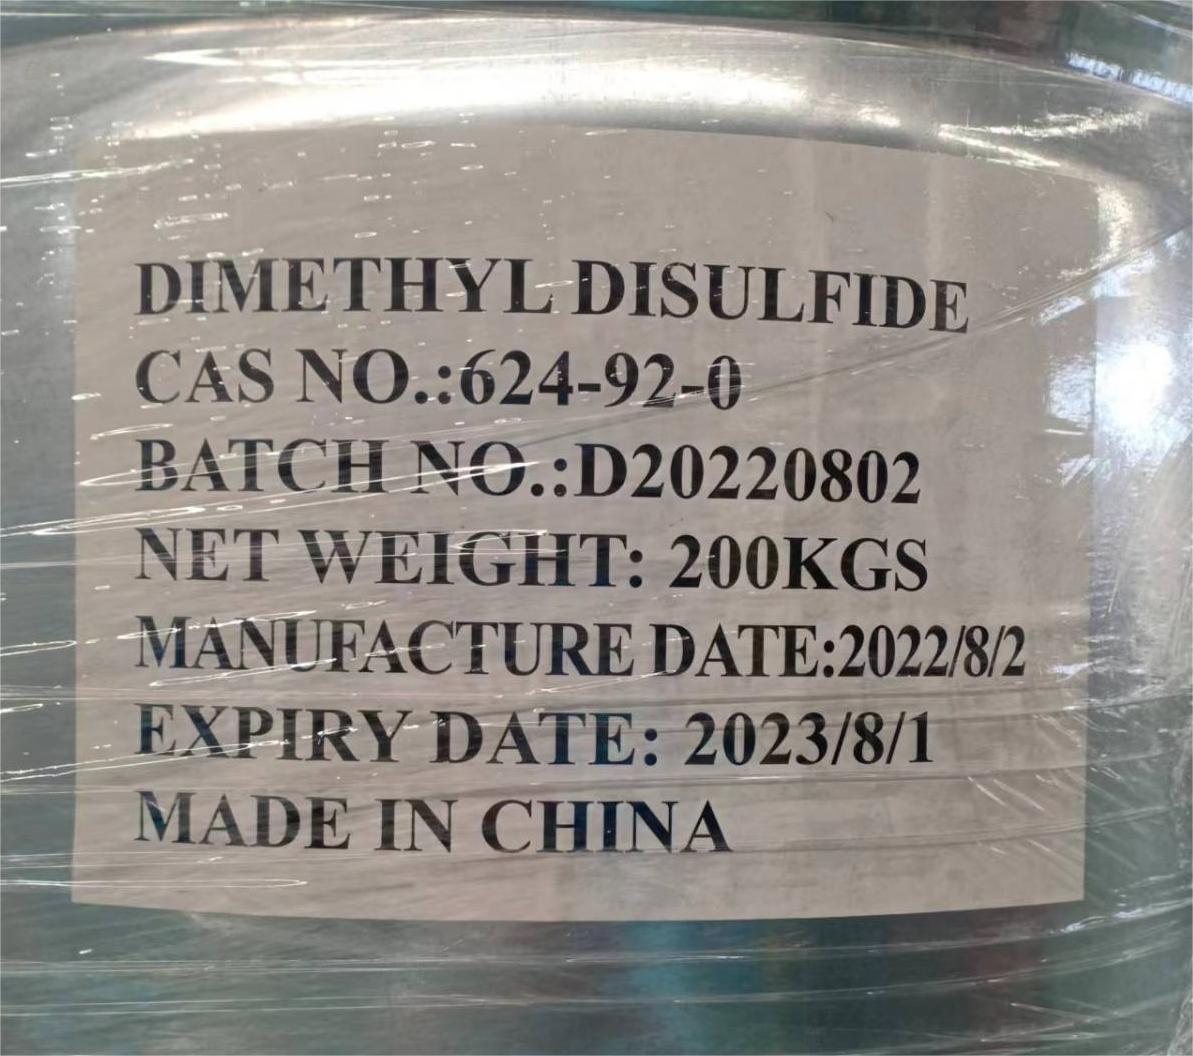 The specification of Dimethyl disulfide / DMDS